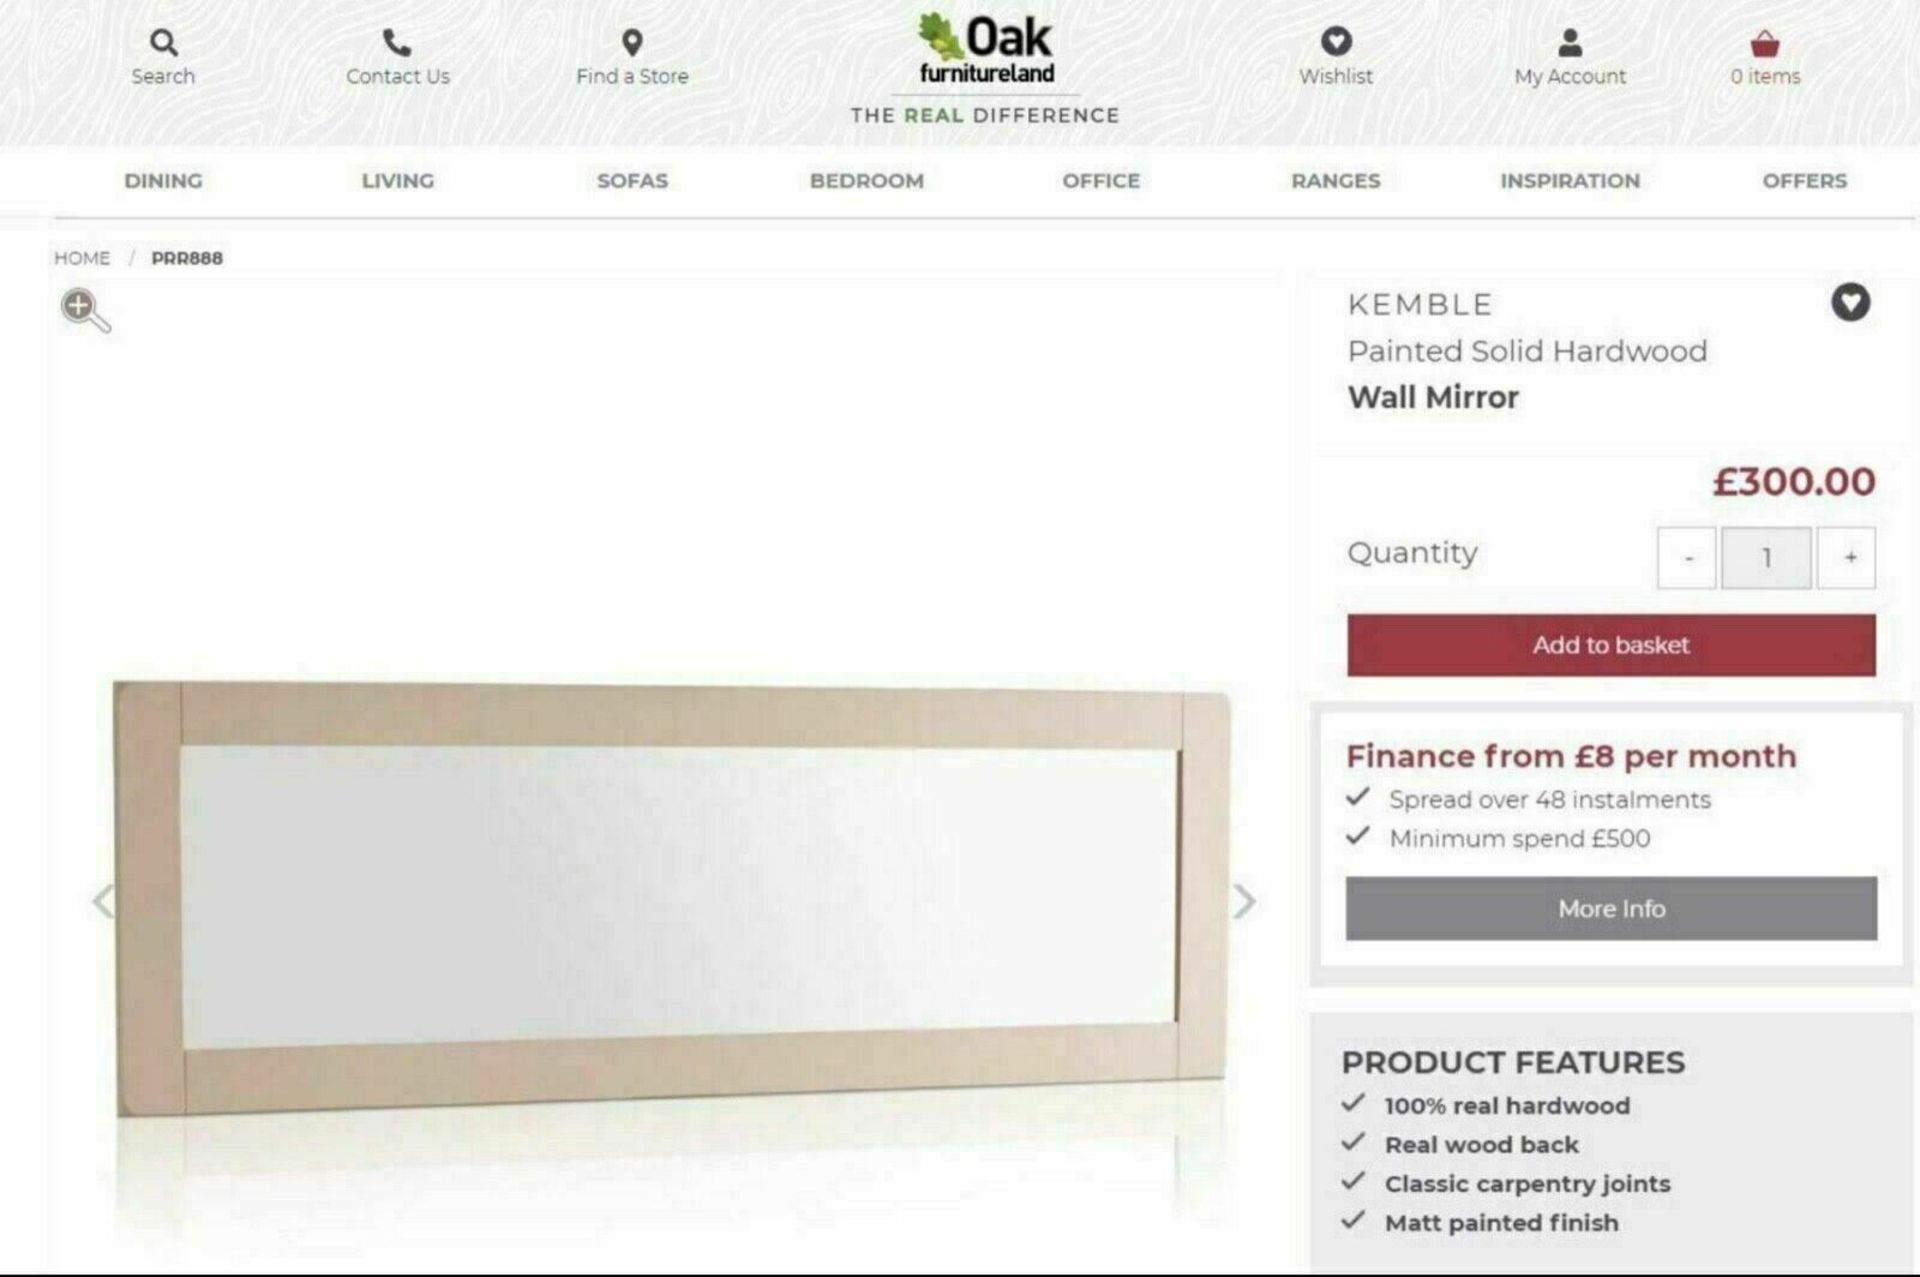 NEW BOXED KEMBLE RUSTIC SOLID OAK & PAINTED WALL MIRROR. 1800x600MM. RRP £330. 100% OAK, REAL WOOD